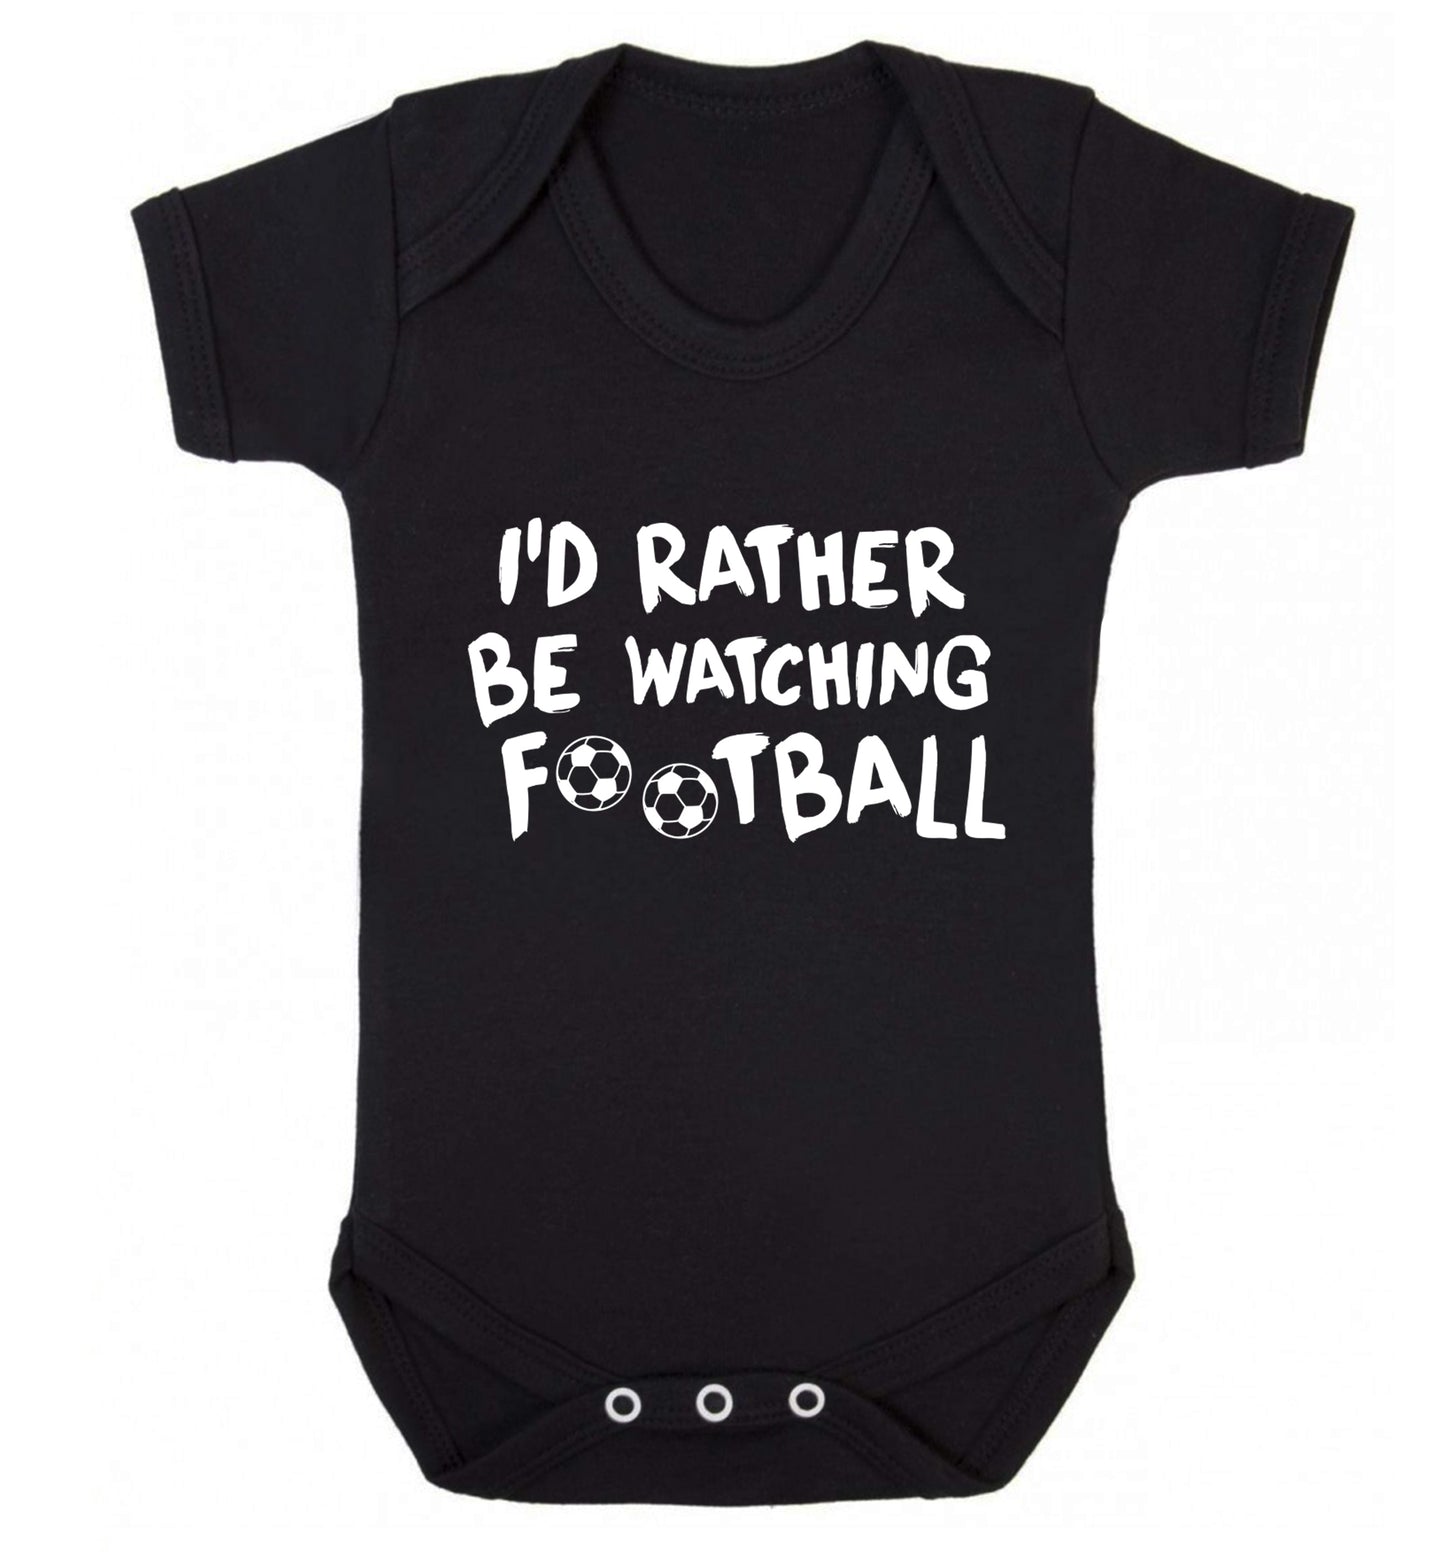 I'd rather be watching football Baby Vest black 18-24 months